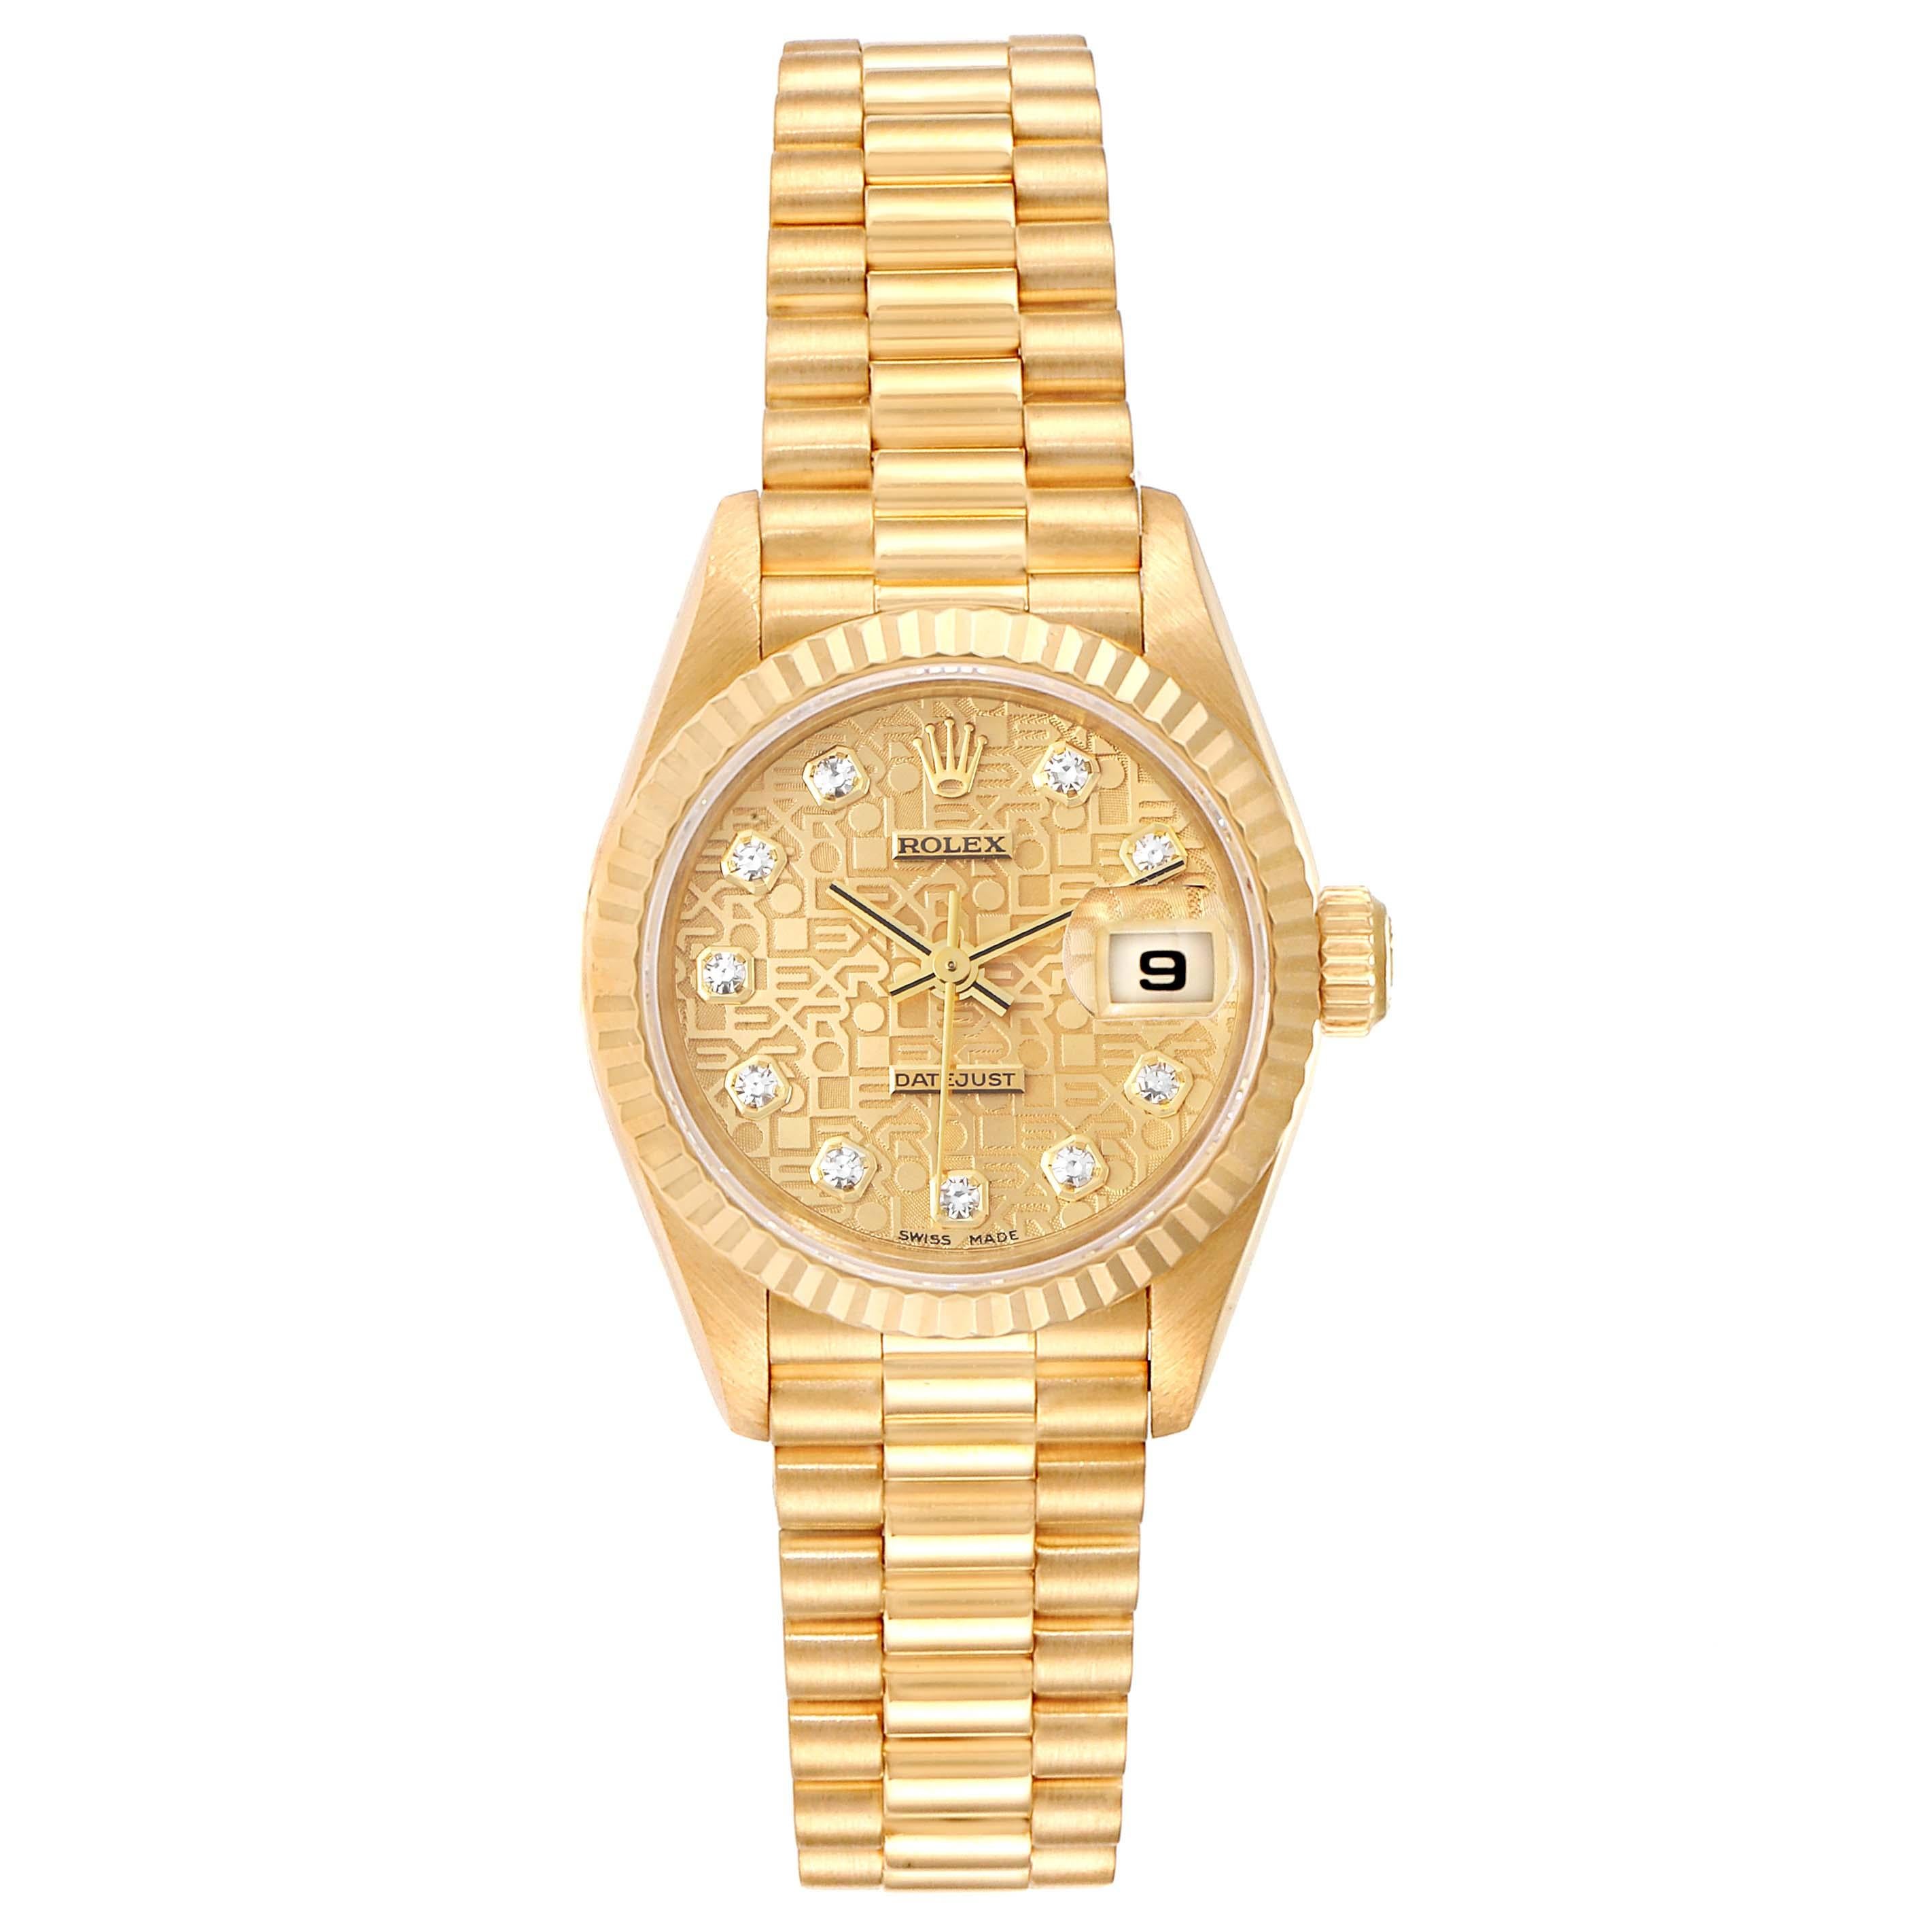 Rolex President Datejust Yellow Gold Diamond Dial Ladies Watch 79178. Officially certified chronometer self-winding movement. 18k yellow gold oyster case 26.0 mm in diameter. Rolex logo on a crown. 18k yellow gold fluted bezel. Scratch resistant